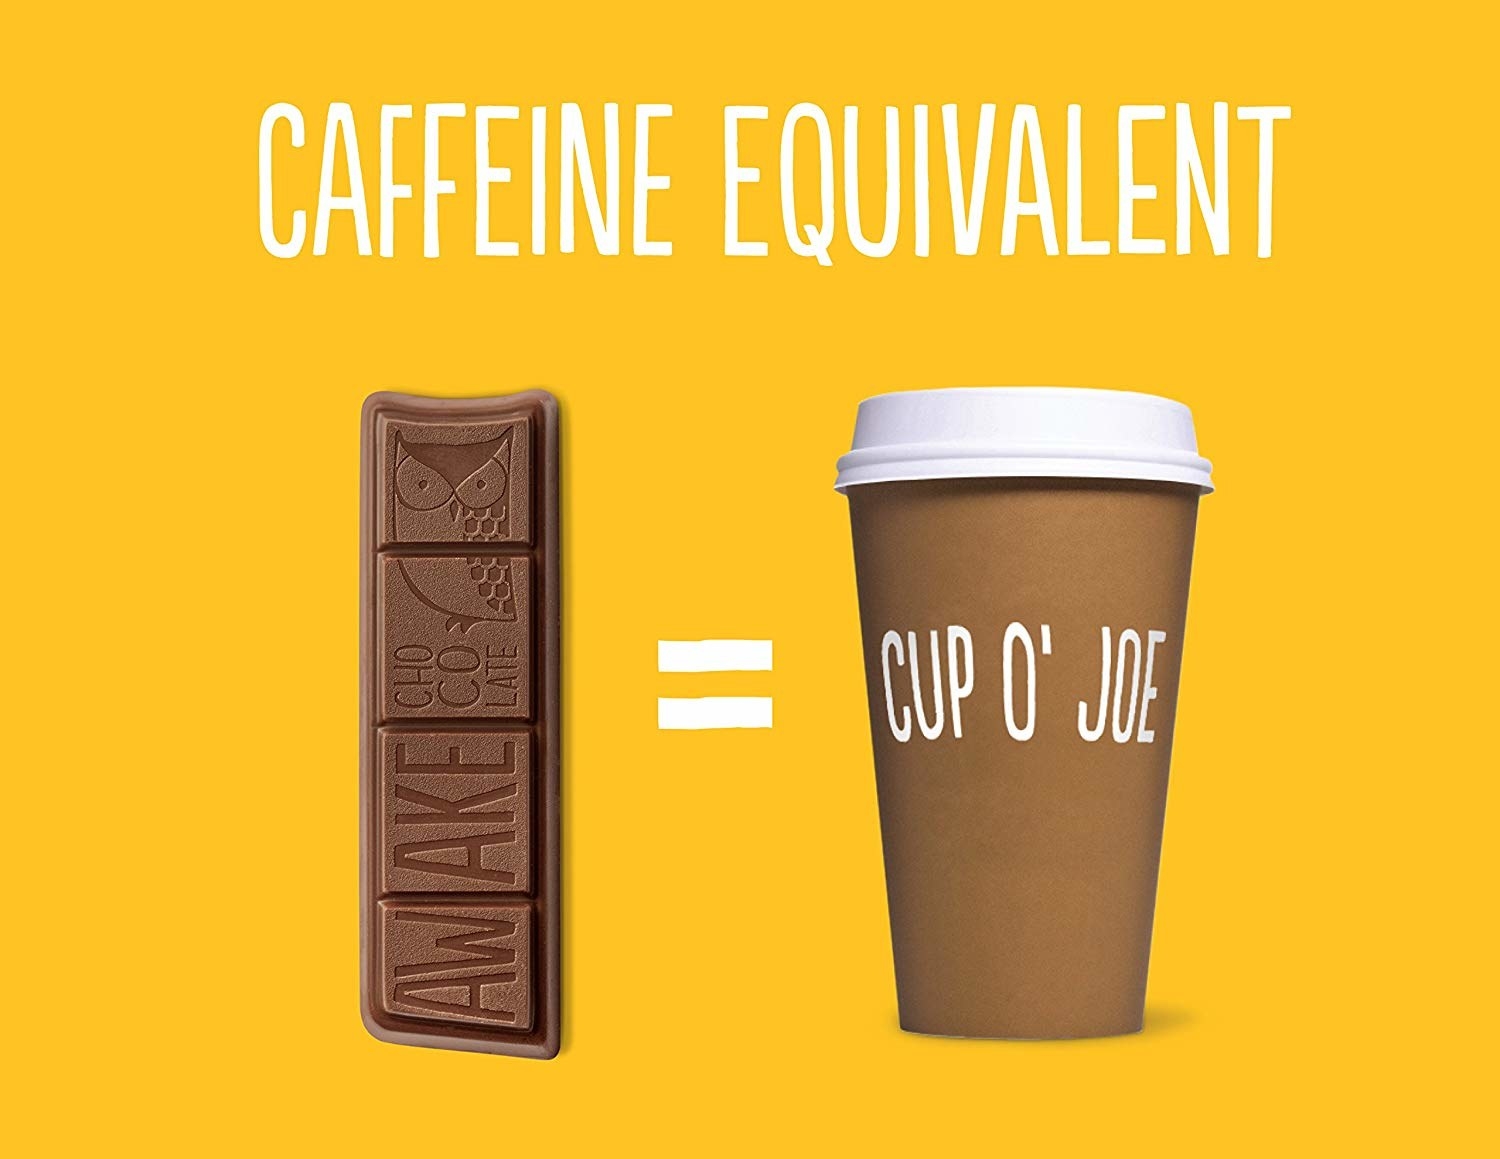 An illustrated representation of how one piece of this chocolate is the caffeine equivalent of one full cup of coffee